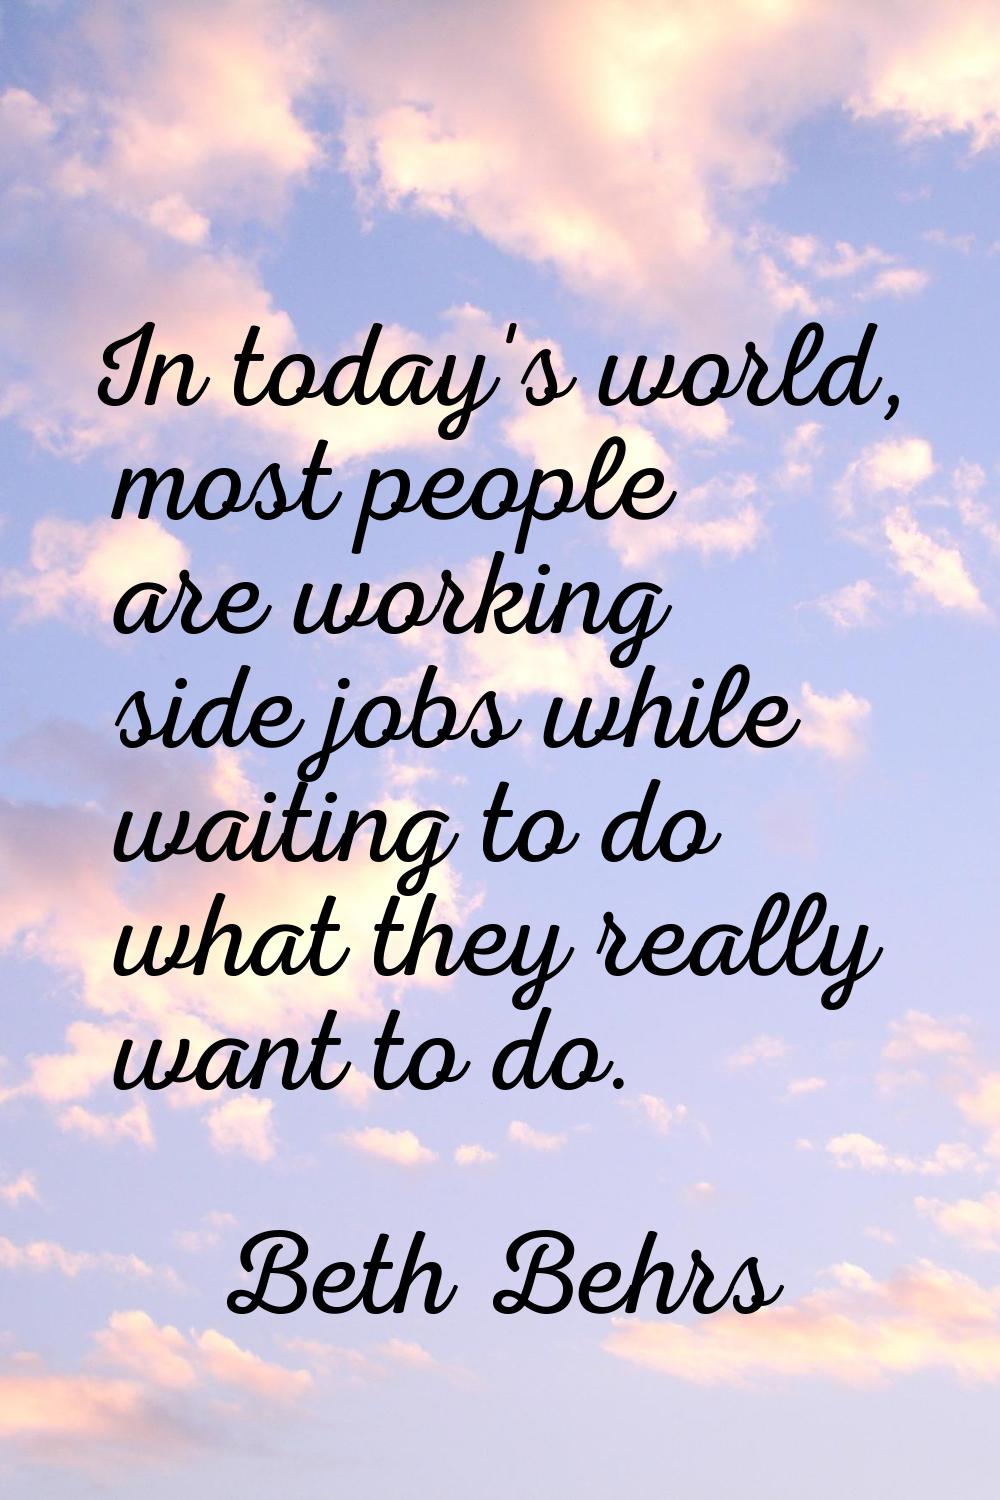 In today's world, most people are working side jobs while waiting to do what they really want to do